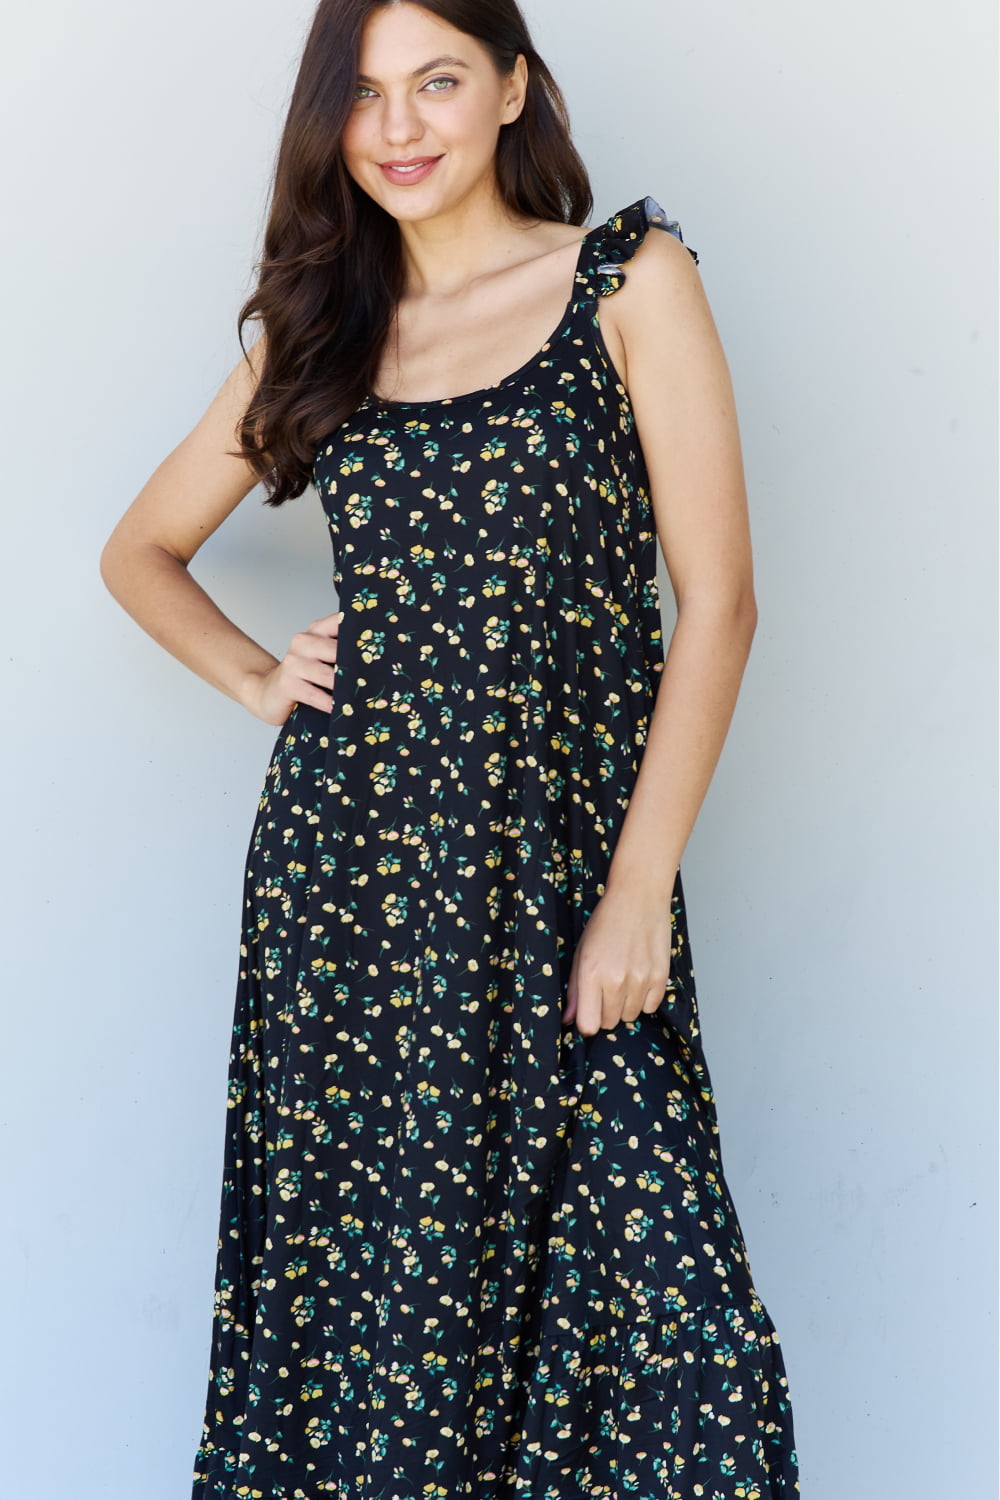 The Garden Ruffle Floral Maxi Dress in Black Yellow Floral - All Dresses - Dresses - 5 - 2024